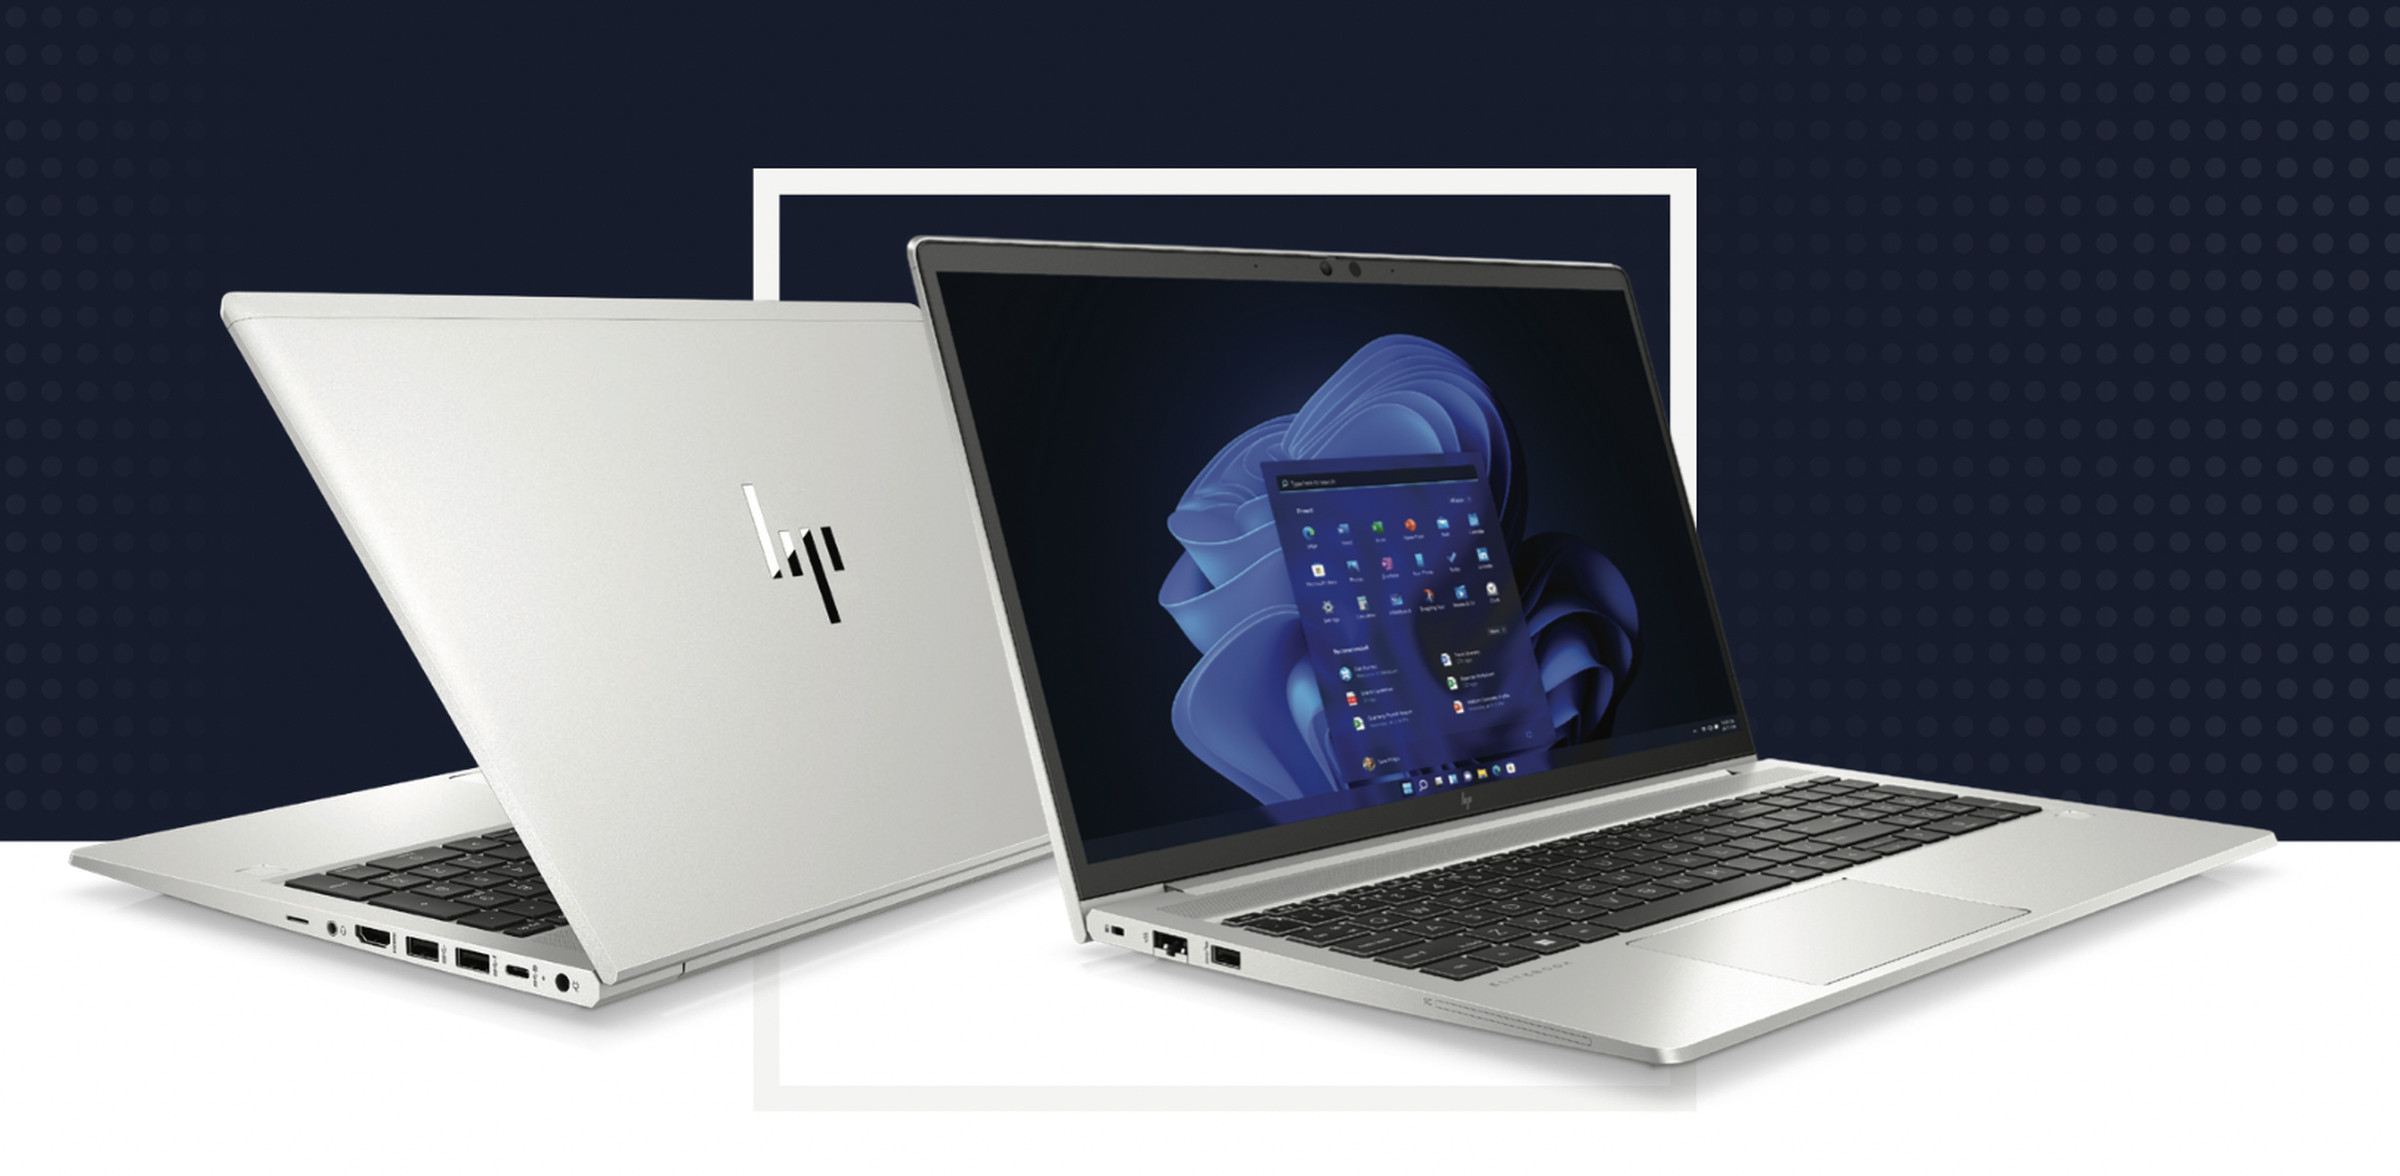 HP positions the Elitebook 655 G9 as “a cost-effective, powerful, and highly secure PC” for enterprise fleets.